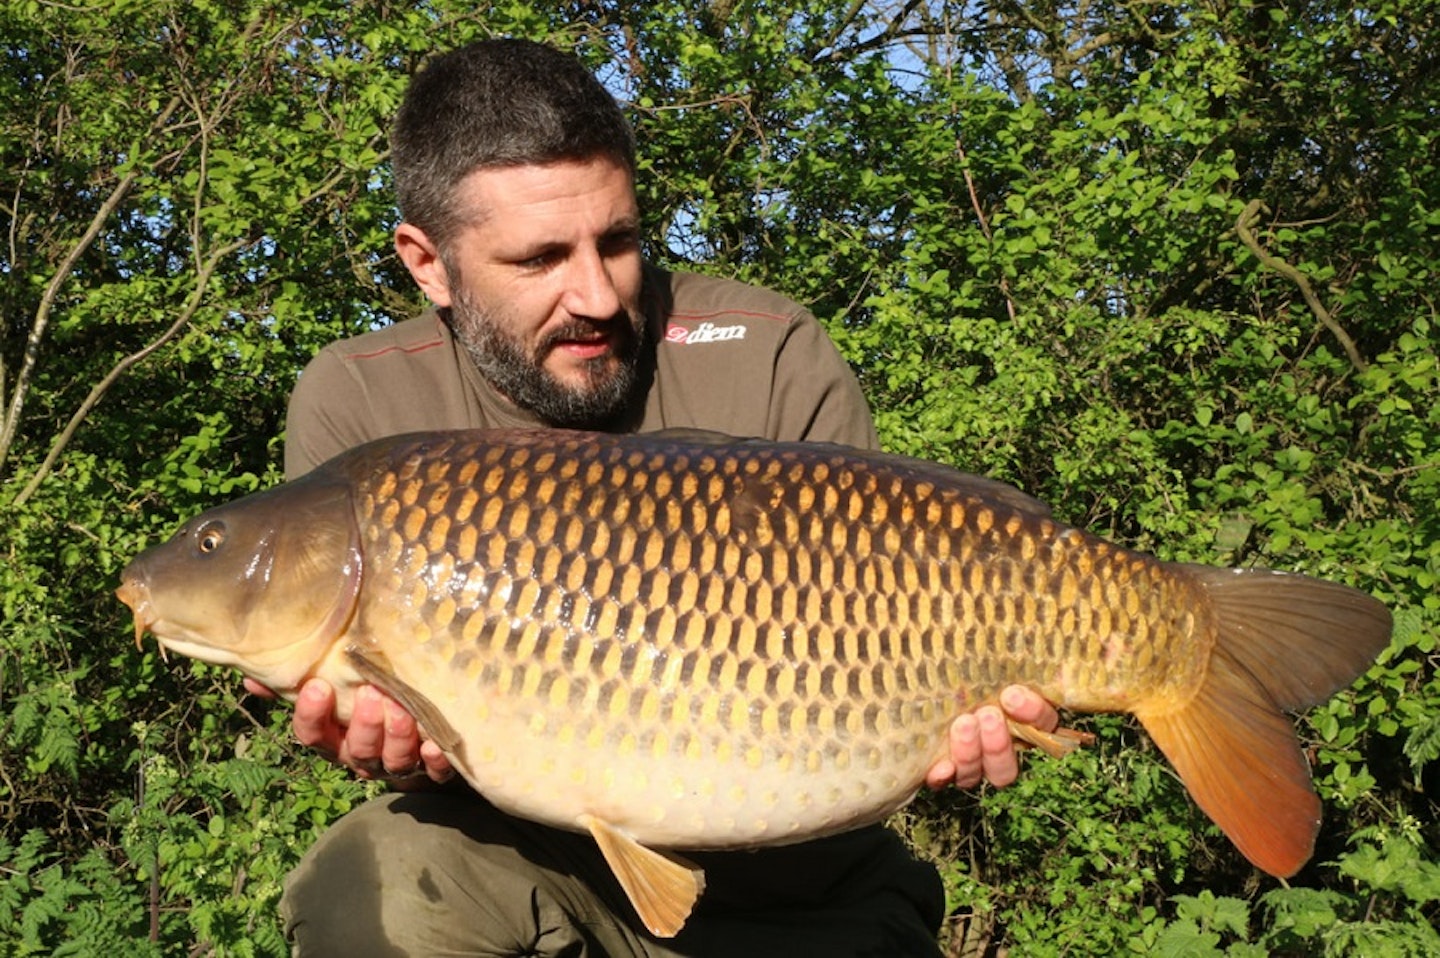 The lake's biggest resident at 28lb (has reached 29lb)